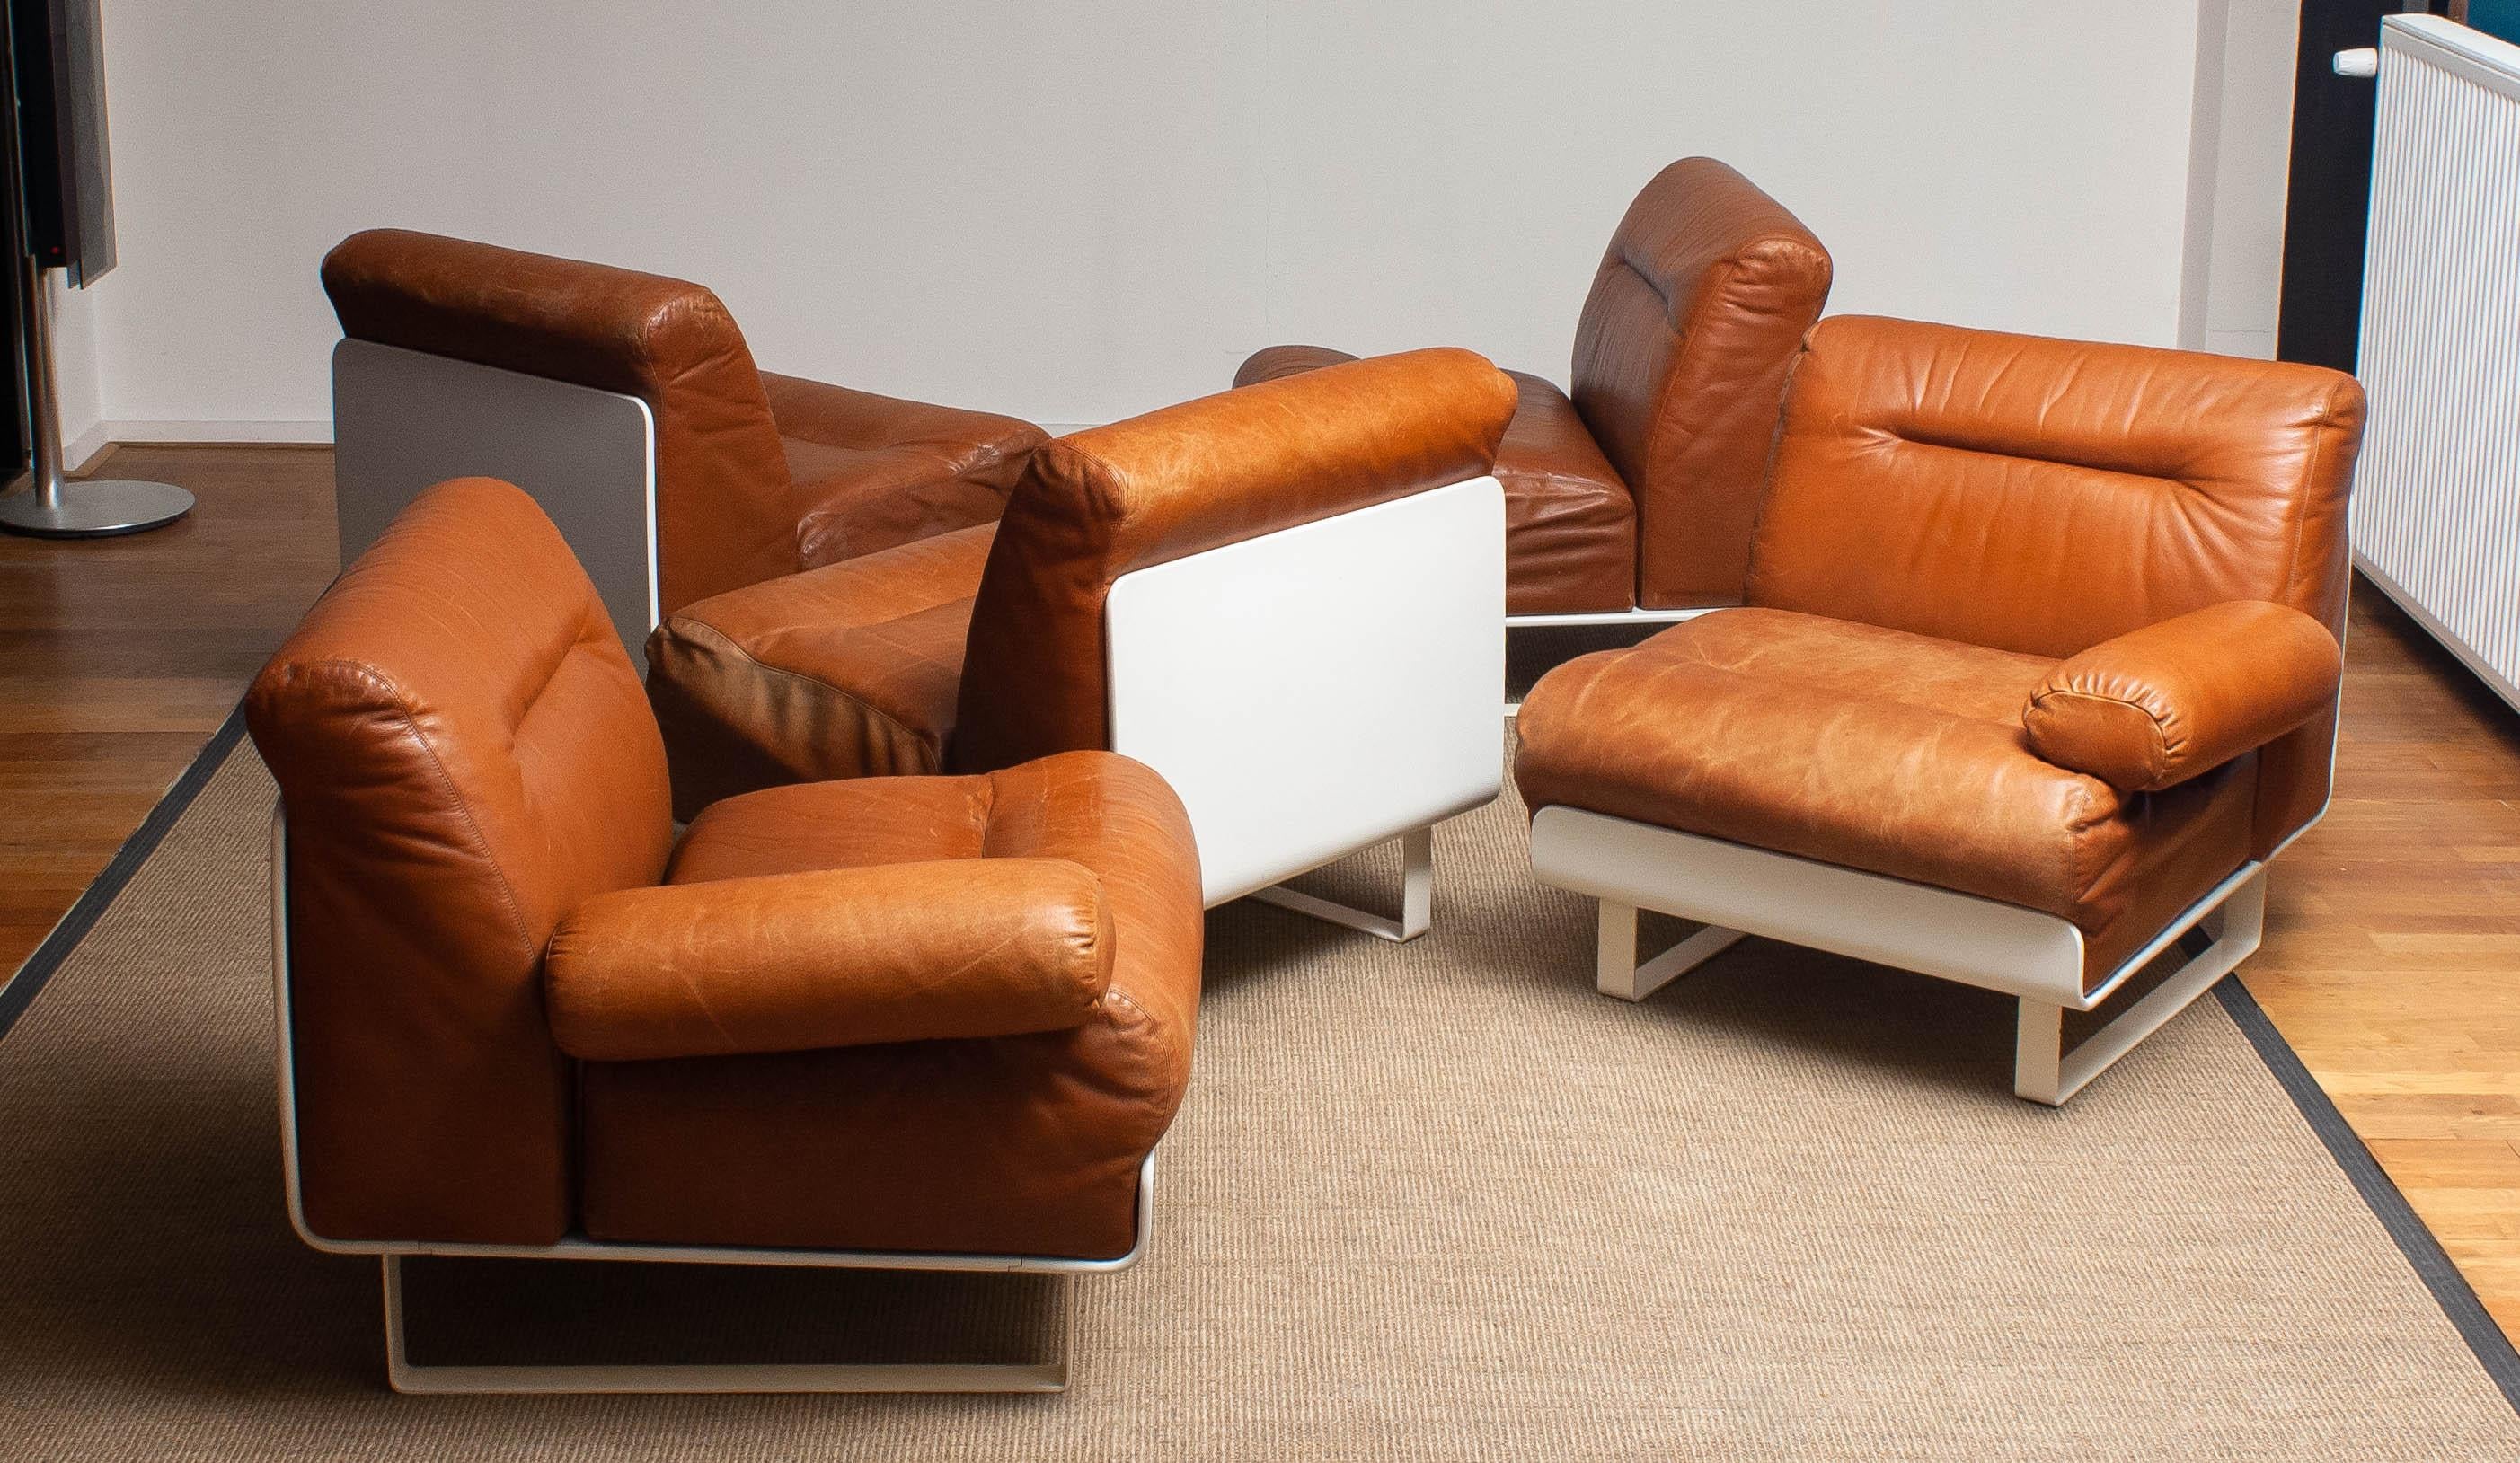 Late 20th Century '70s Tan / Cognac Leather Sectional Sofa / Club Chairs by Luici Colani for COR